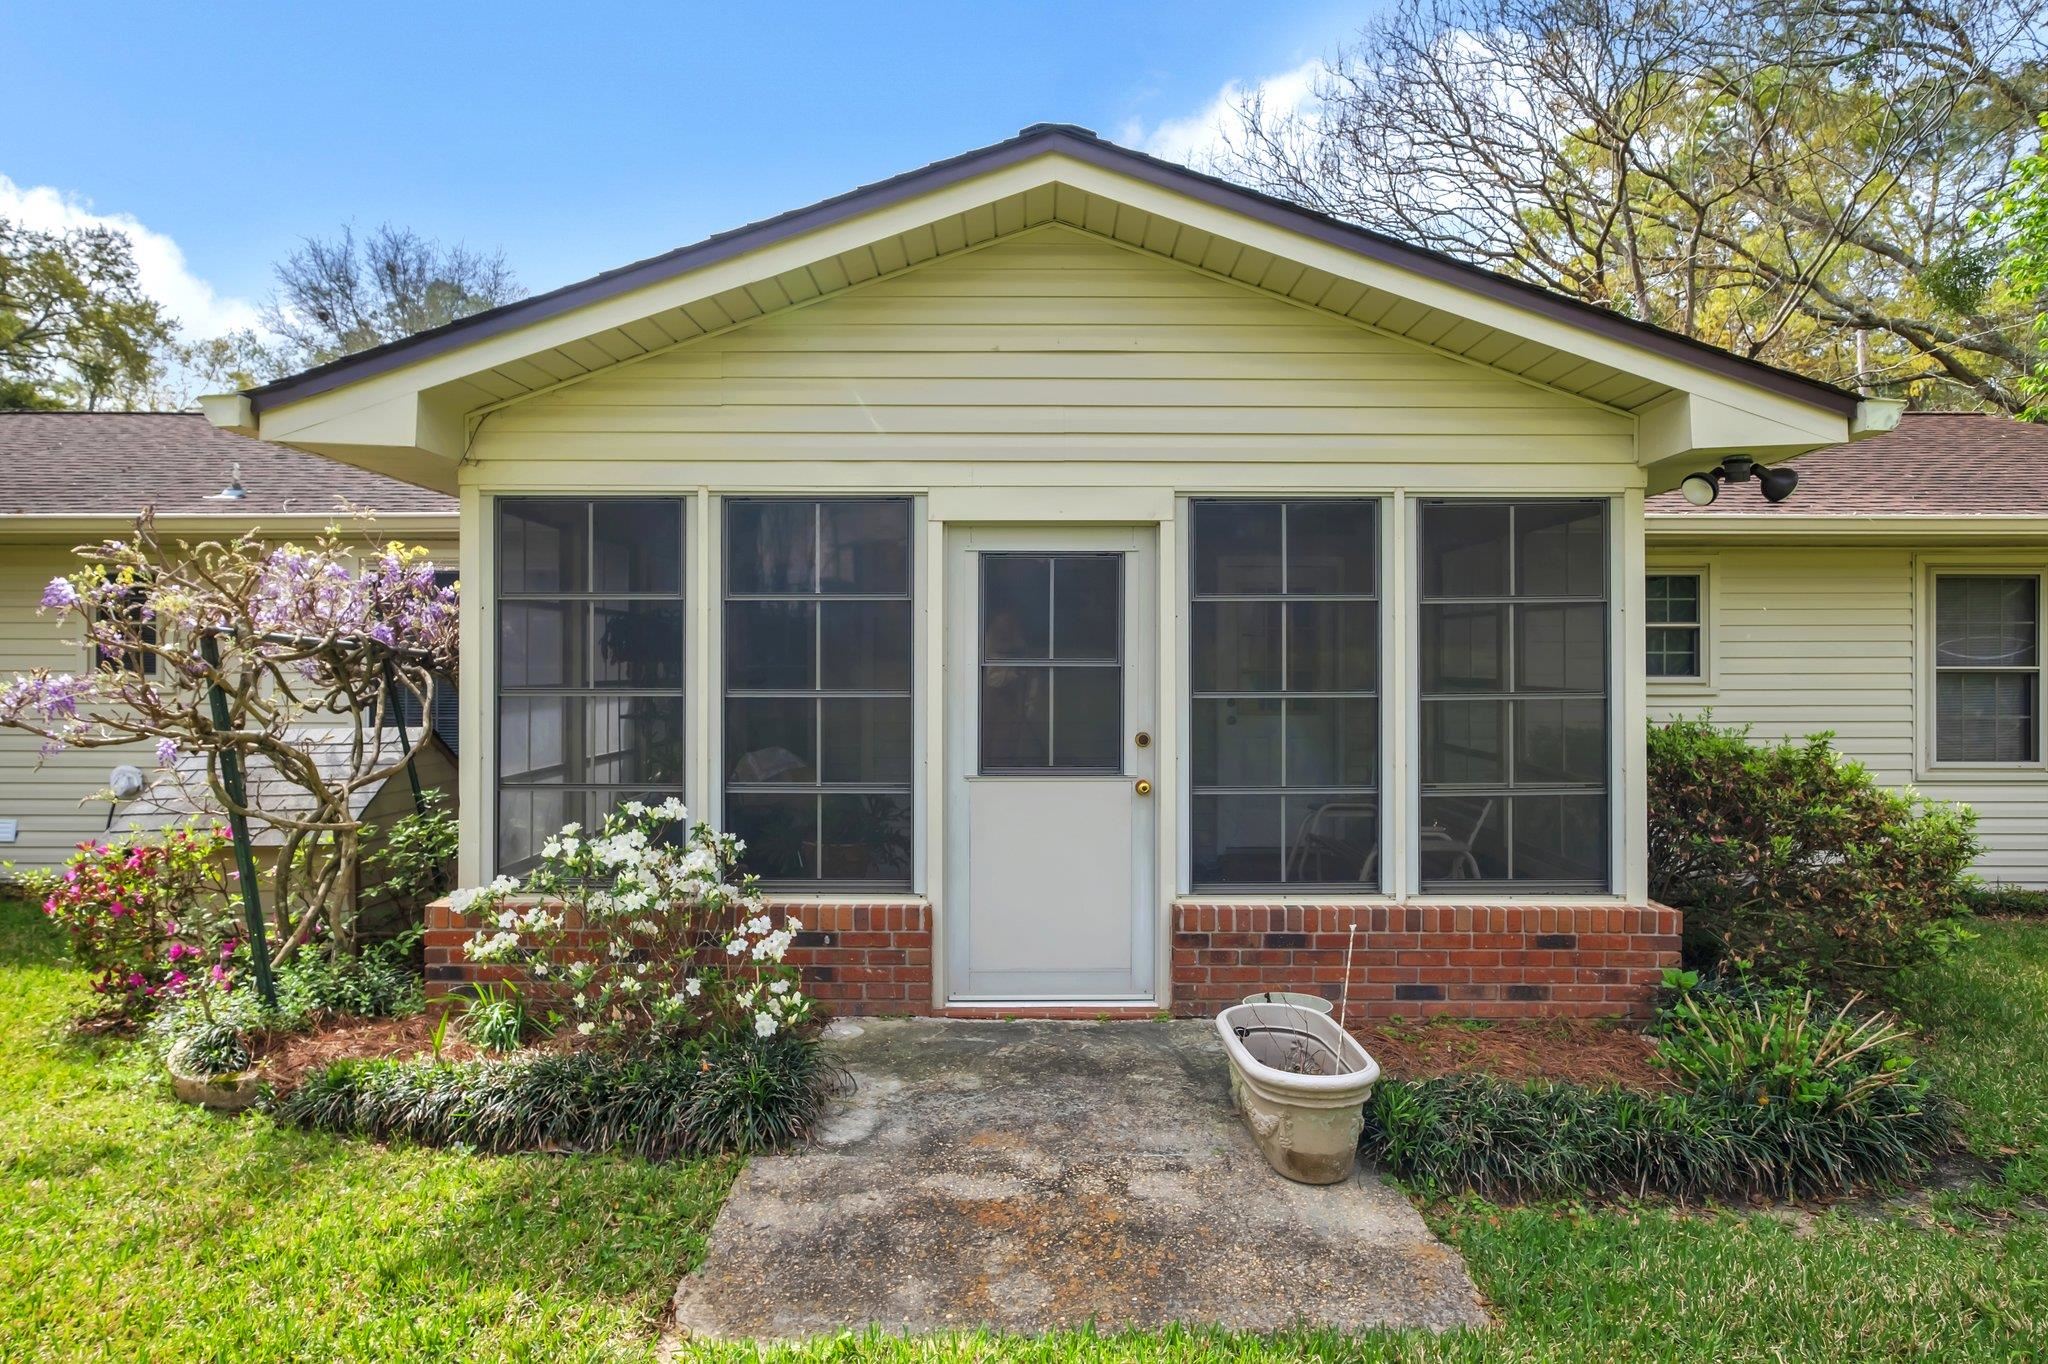 6754 Alan A Dale Trail,TALLAHASSEE,Florida 32309,3 Bedrooms Bedrooms,2 BathroomsBathrooms,Detached single family,6754 Alan A Dale Trail,369642